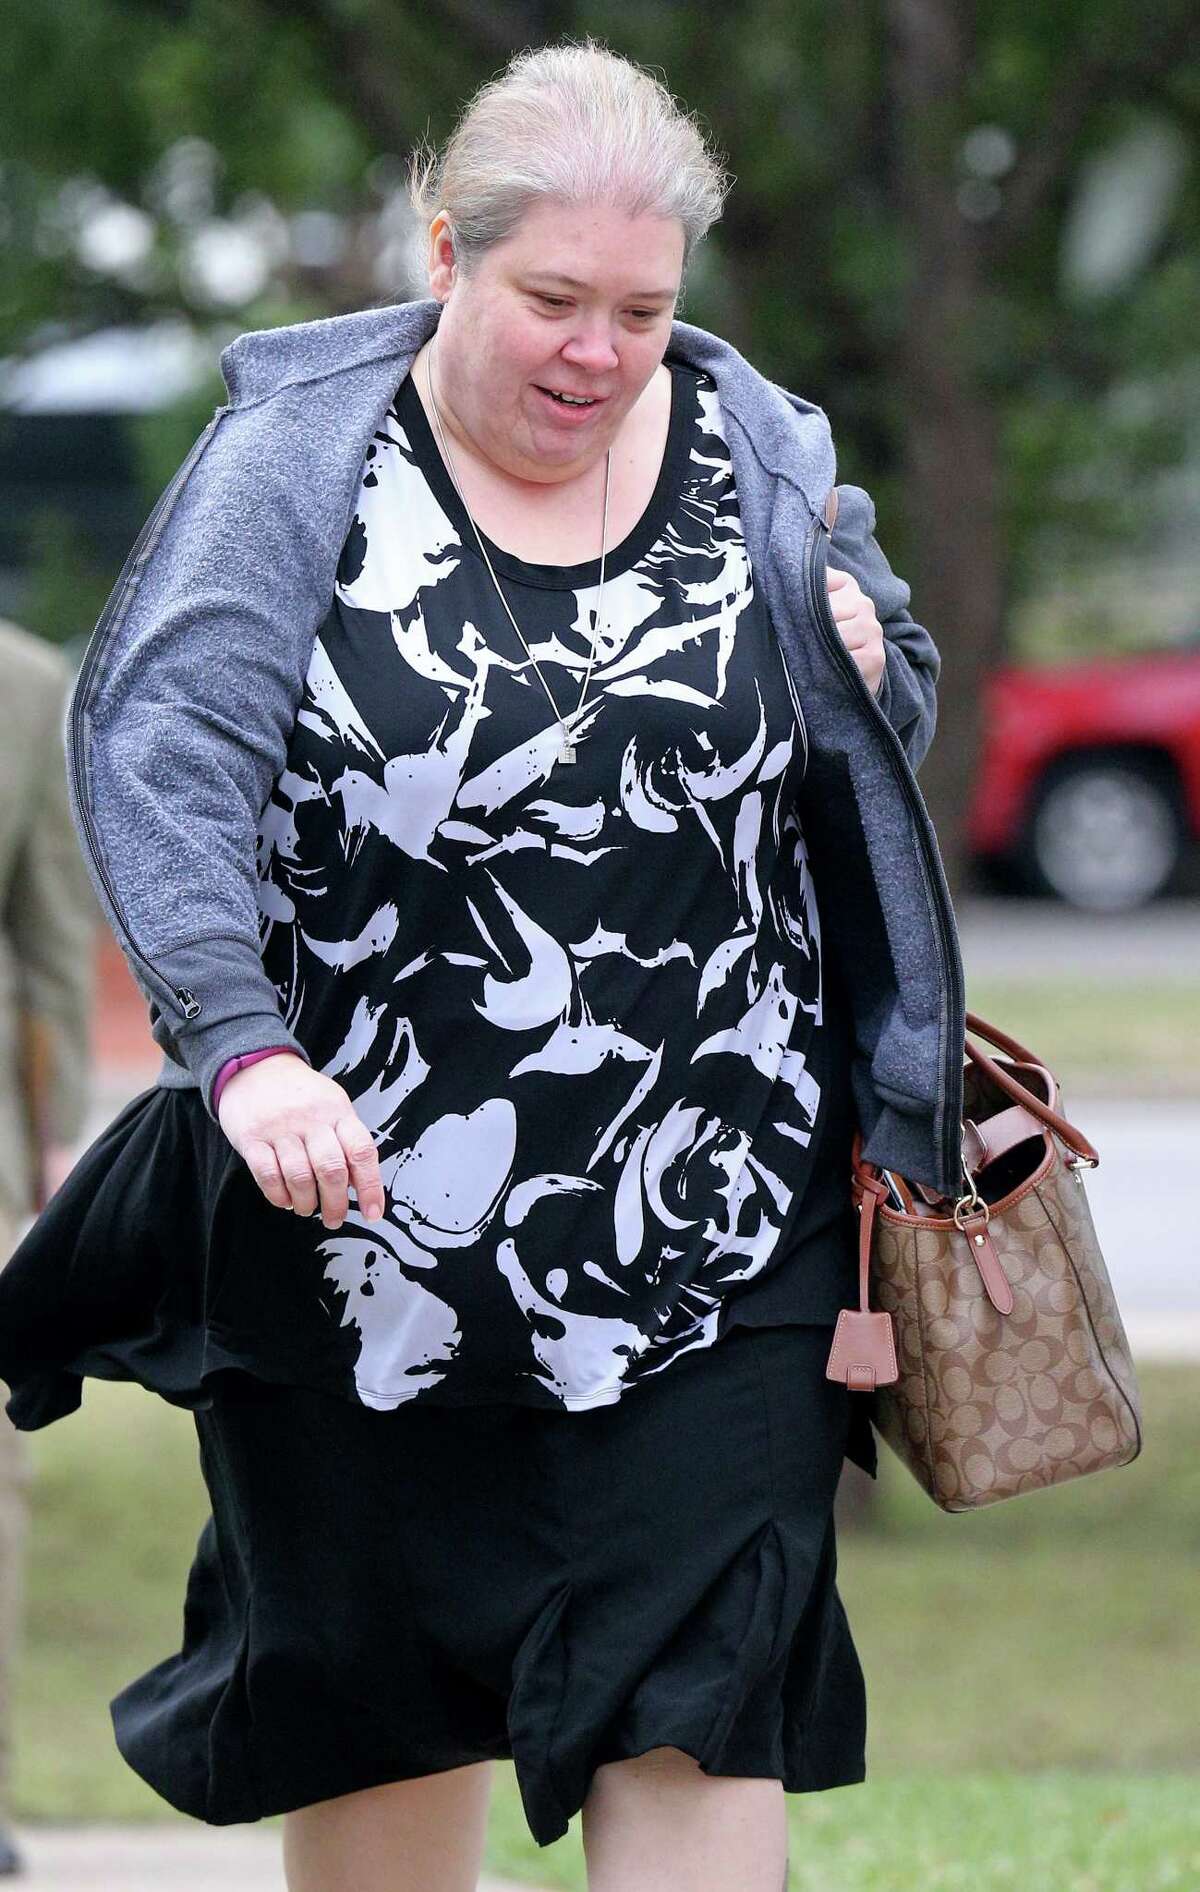 Former FourWinds Logistics comptroller Laura Jacobs is expected to testify Tuesday in the criminal fraud trial of state Sen. Carlos Ureseti and co-defendant Gary Cain, a company consultant.